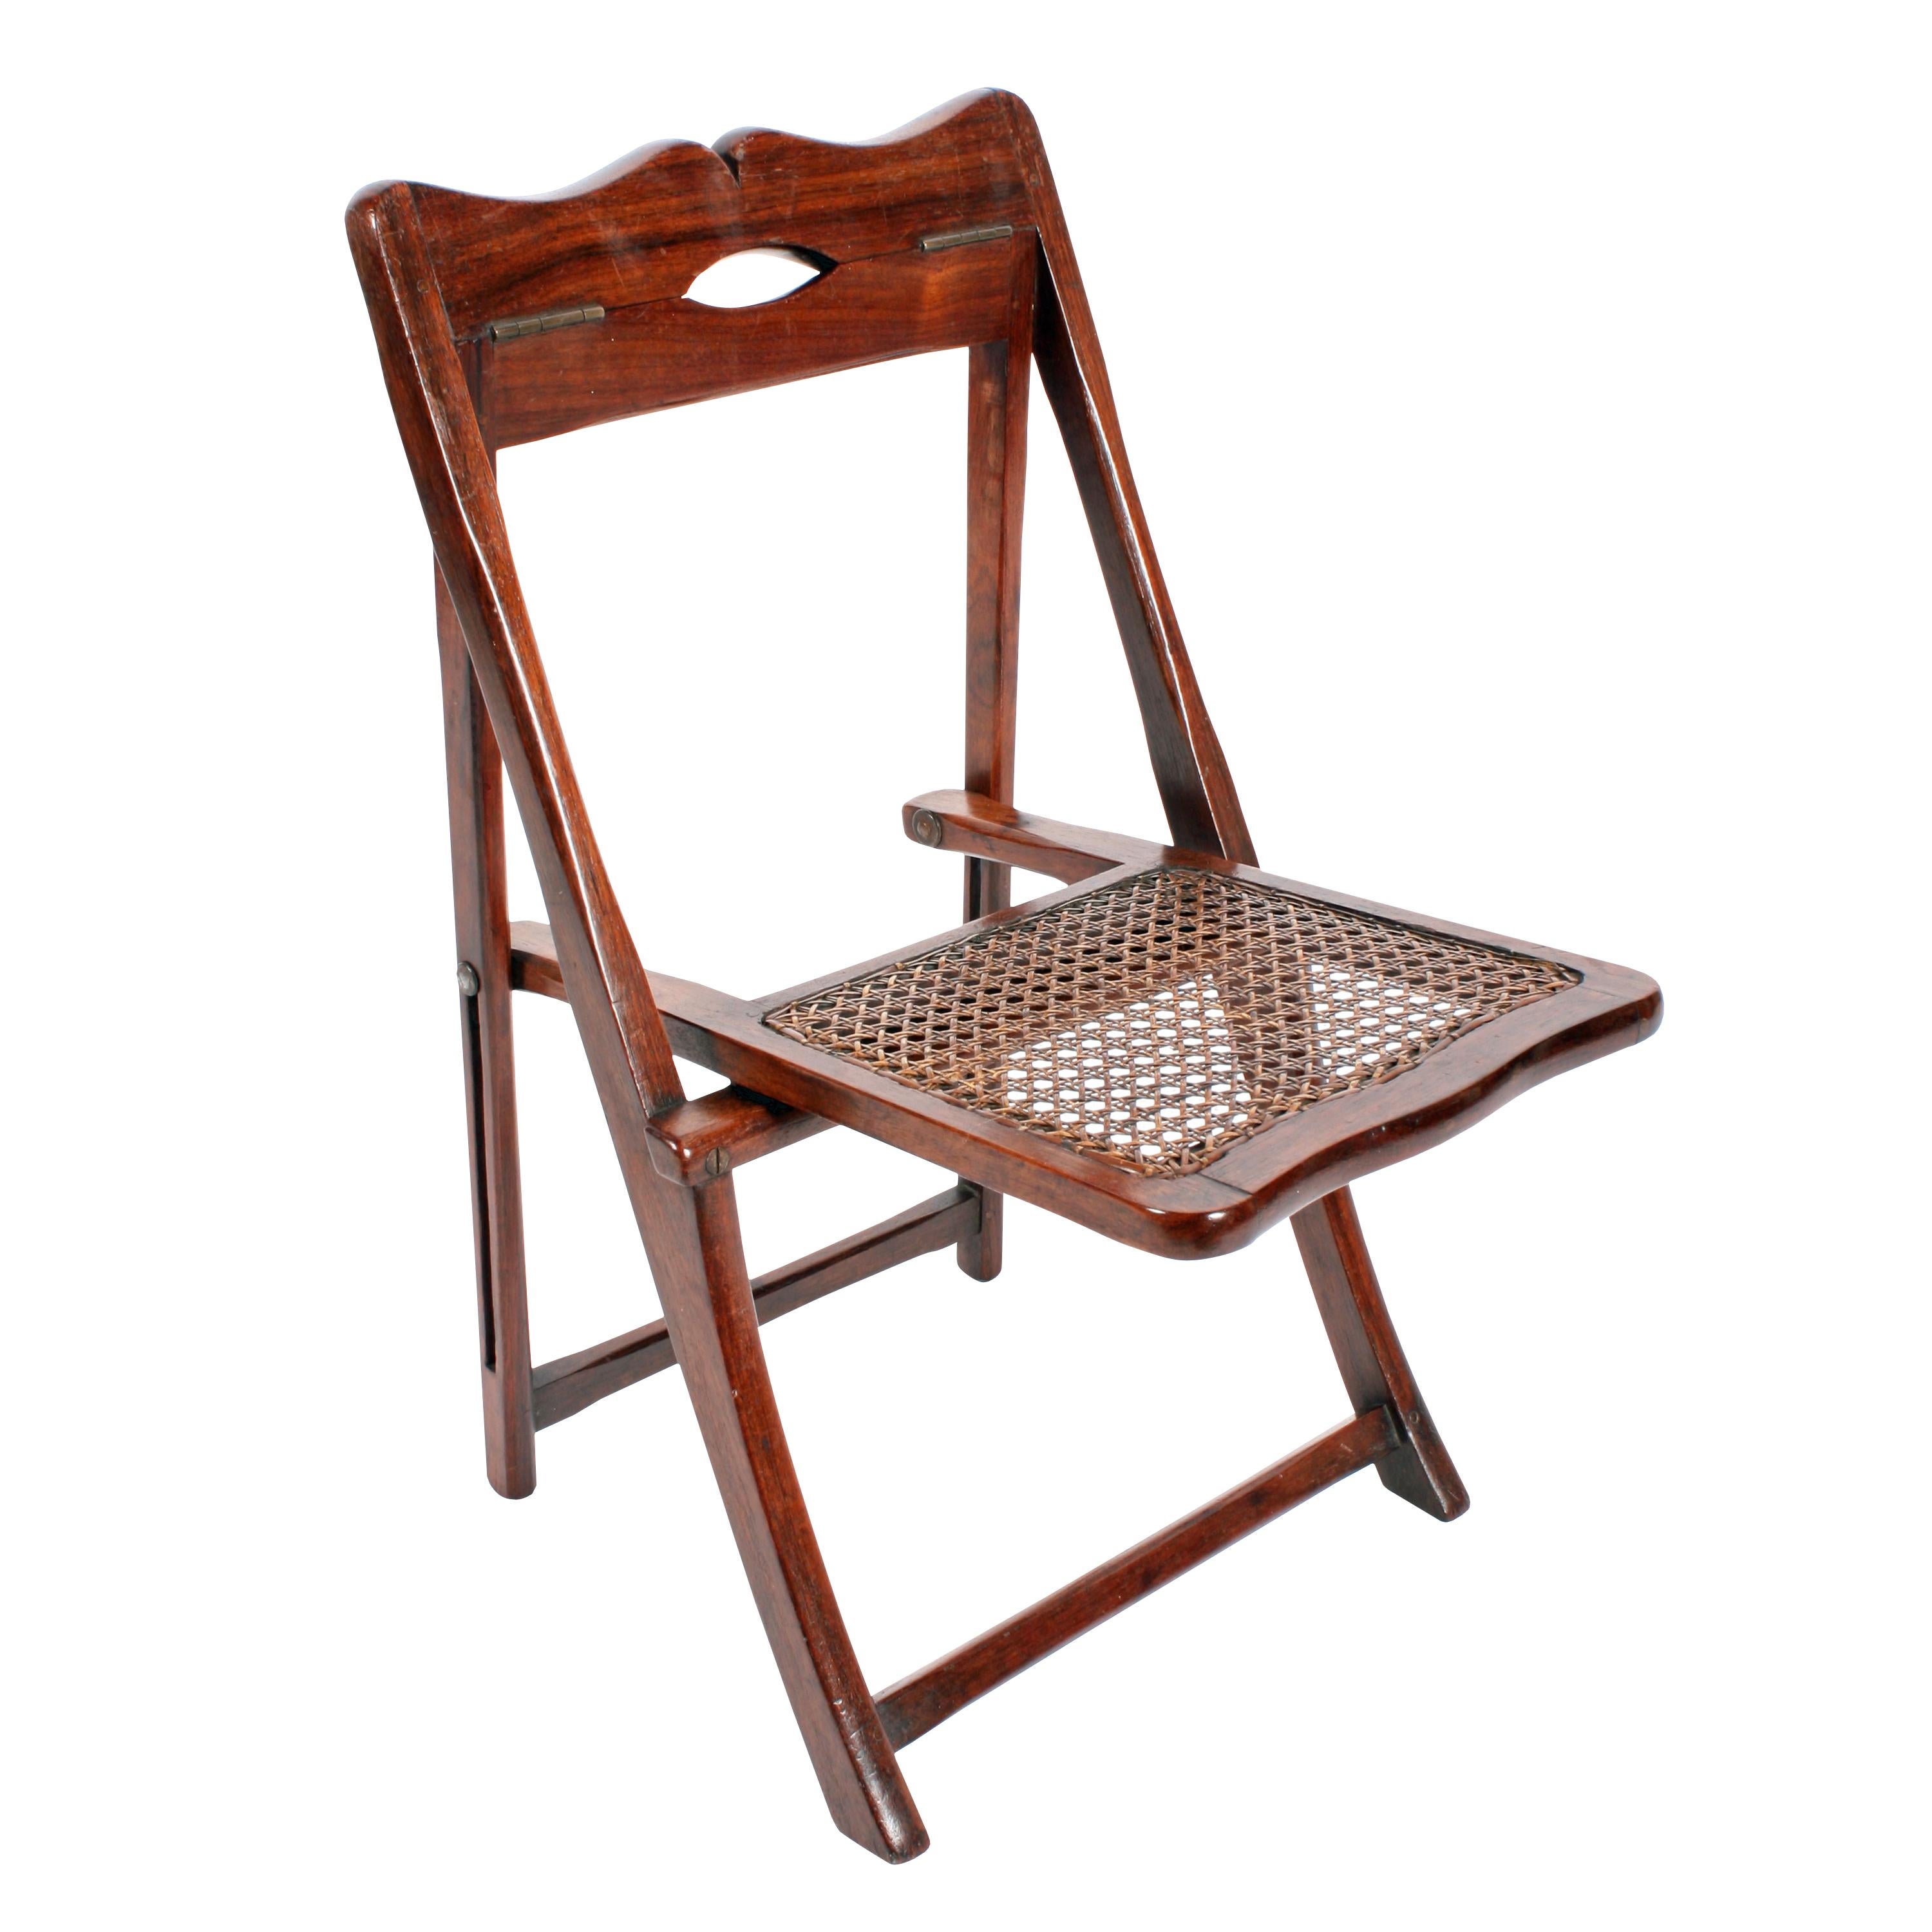 A late 19th-early 20th century colonial rosewood child's folding chair.

The chair has a bergère cane seat and brass hinges so it can fold completely flat.

The chair has a shaped top rail with a small hand hole in the centre.

The chair is in